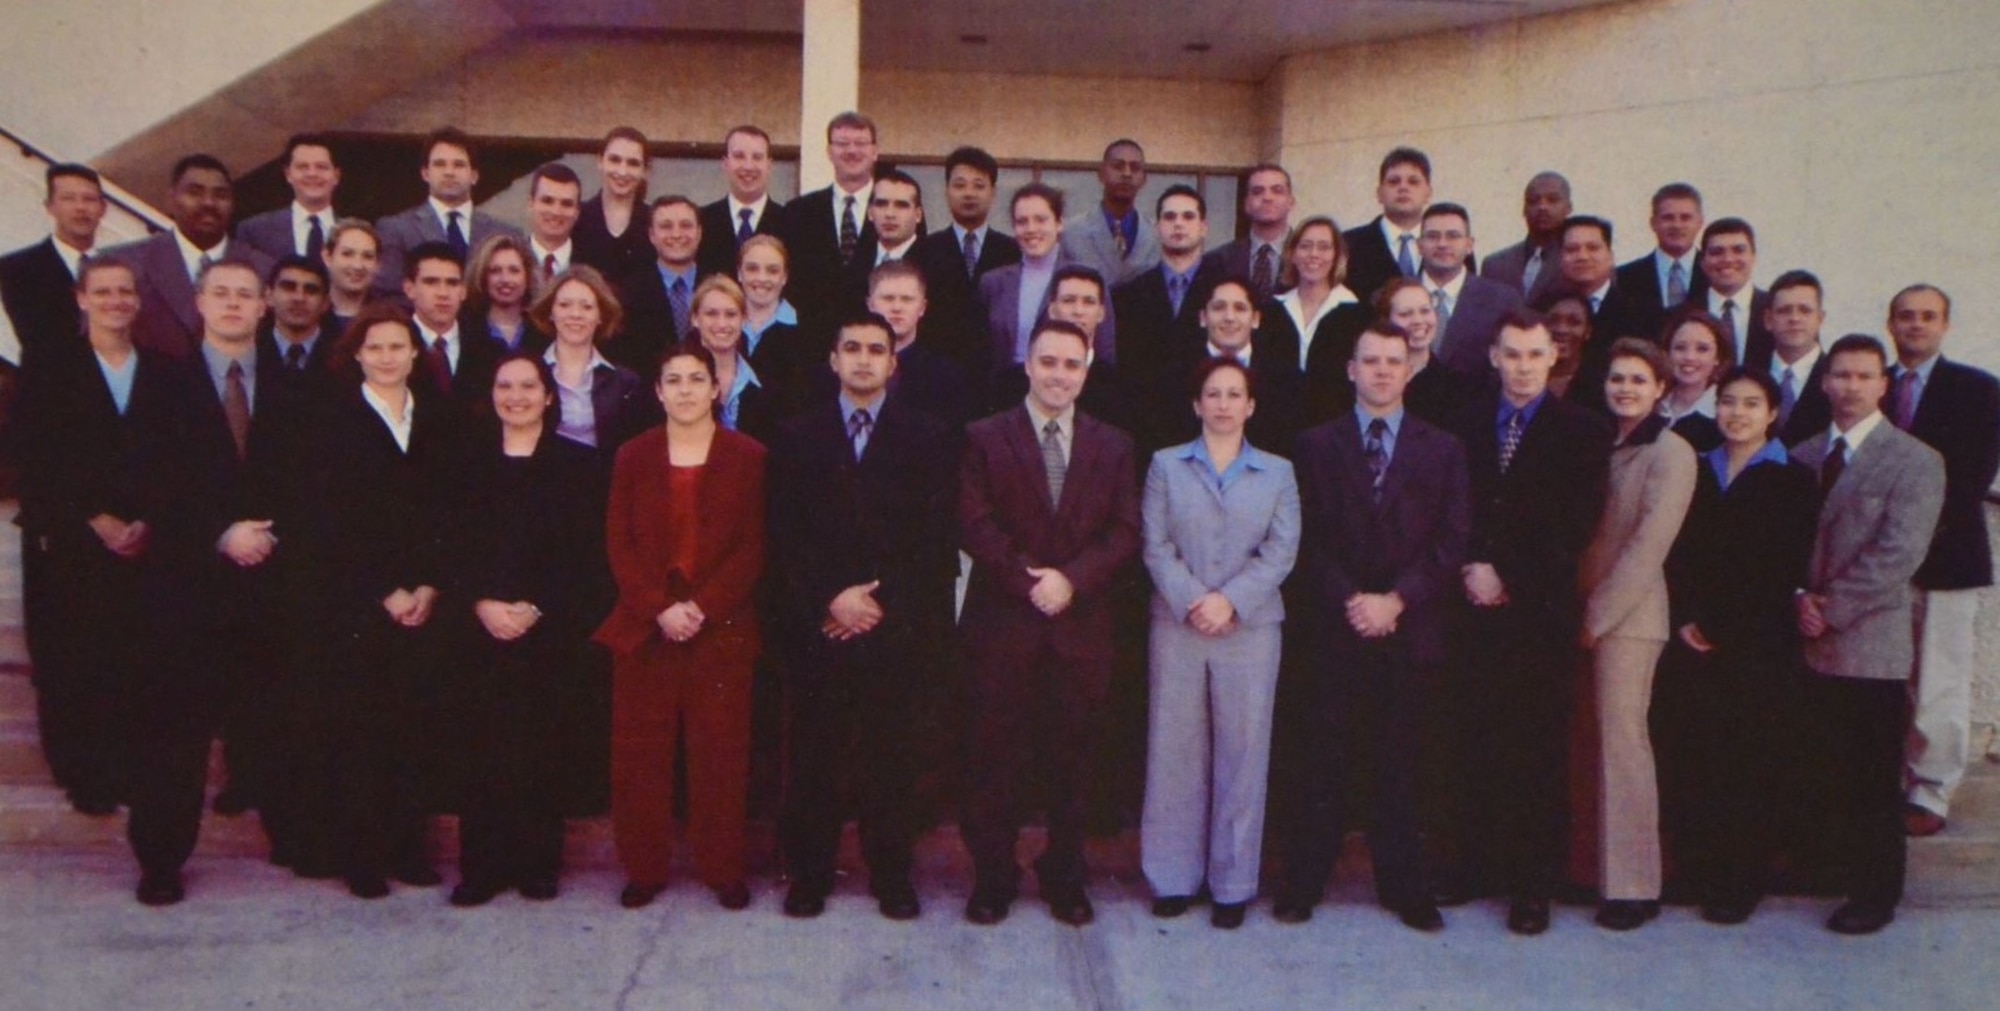 AFSIA Basic Special Investigator’s Course Class 301 class photo. (U.S. Air Force photo)